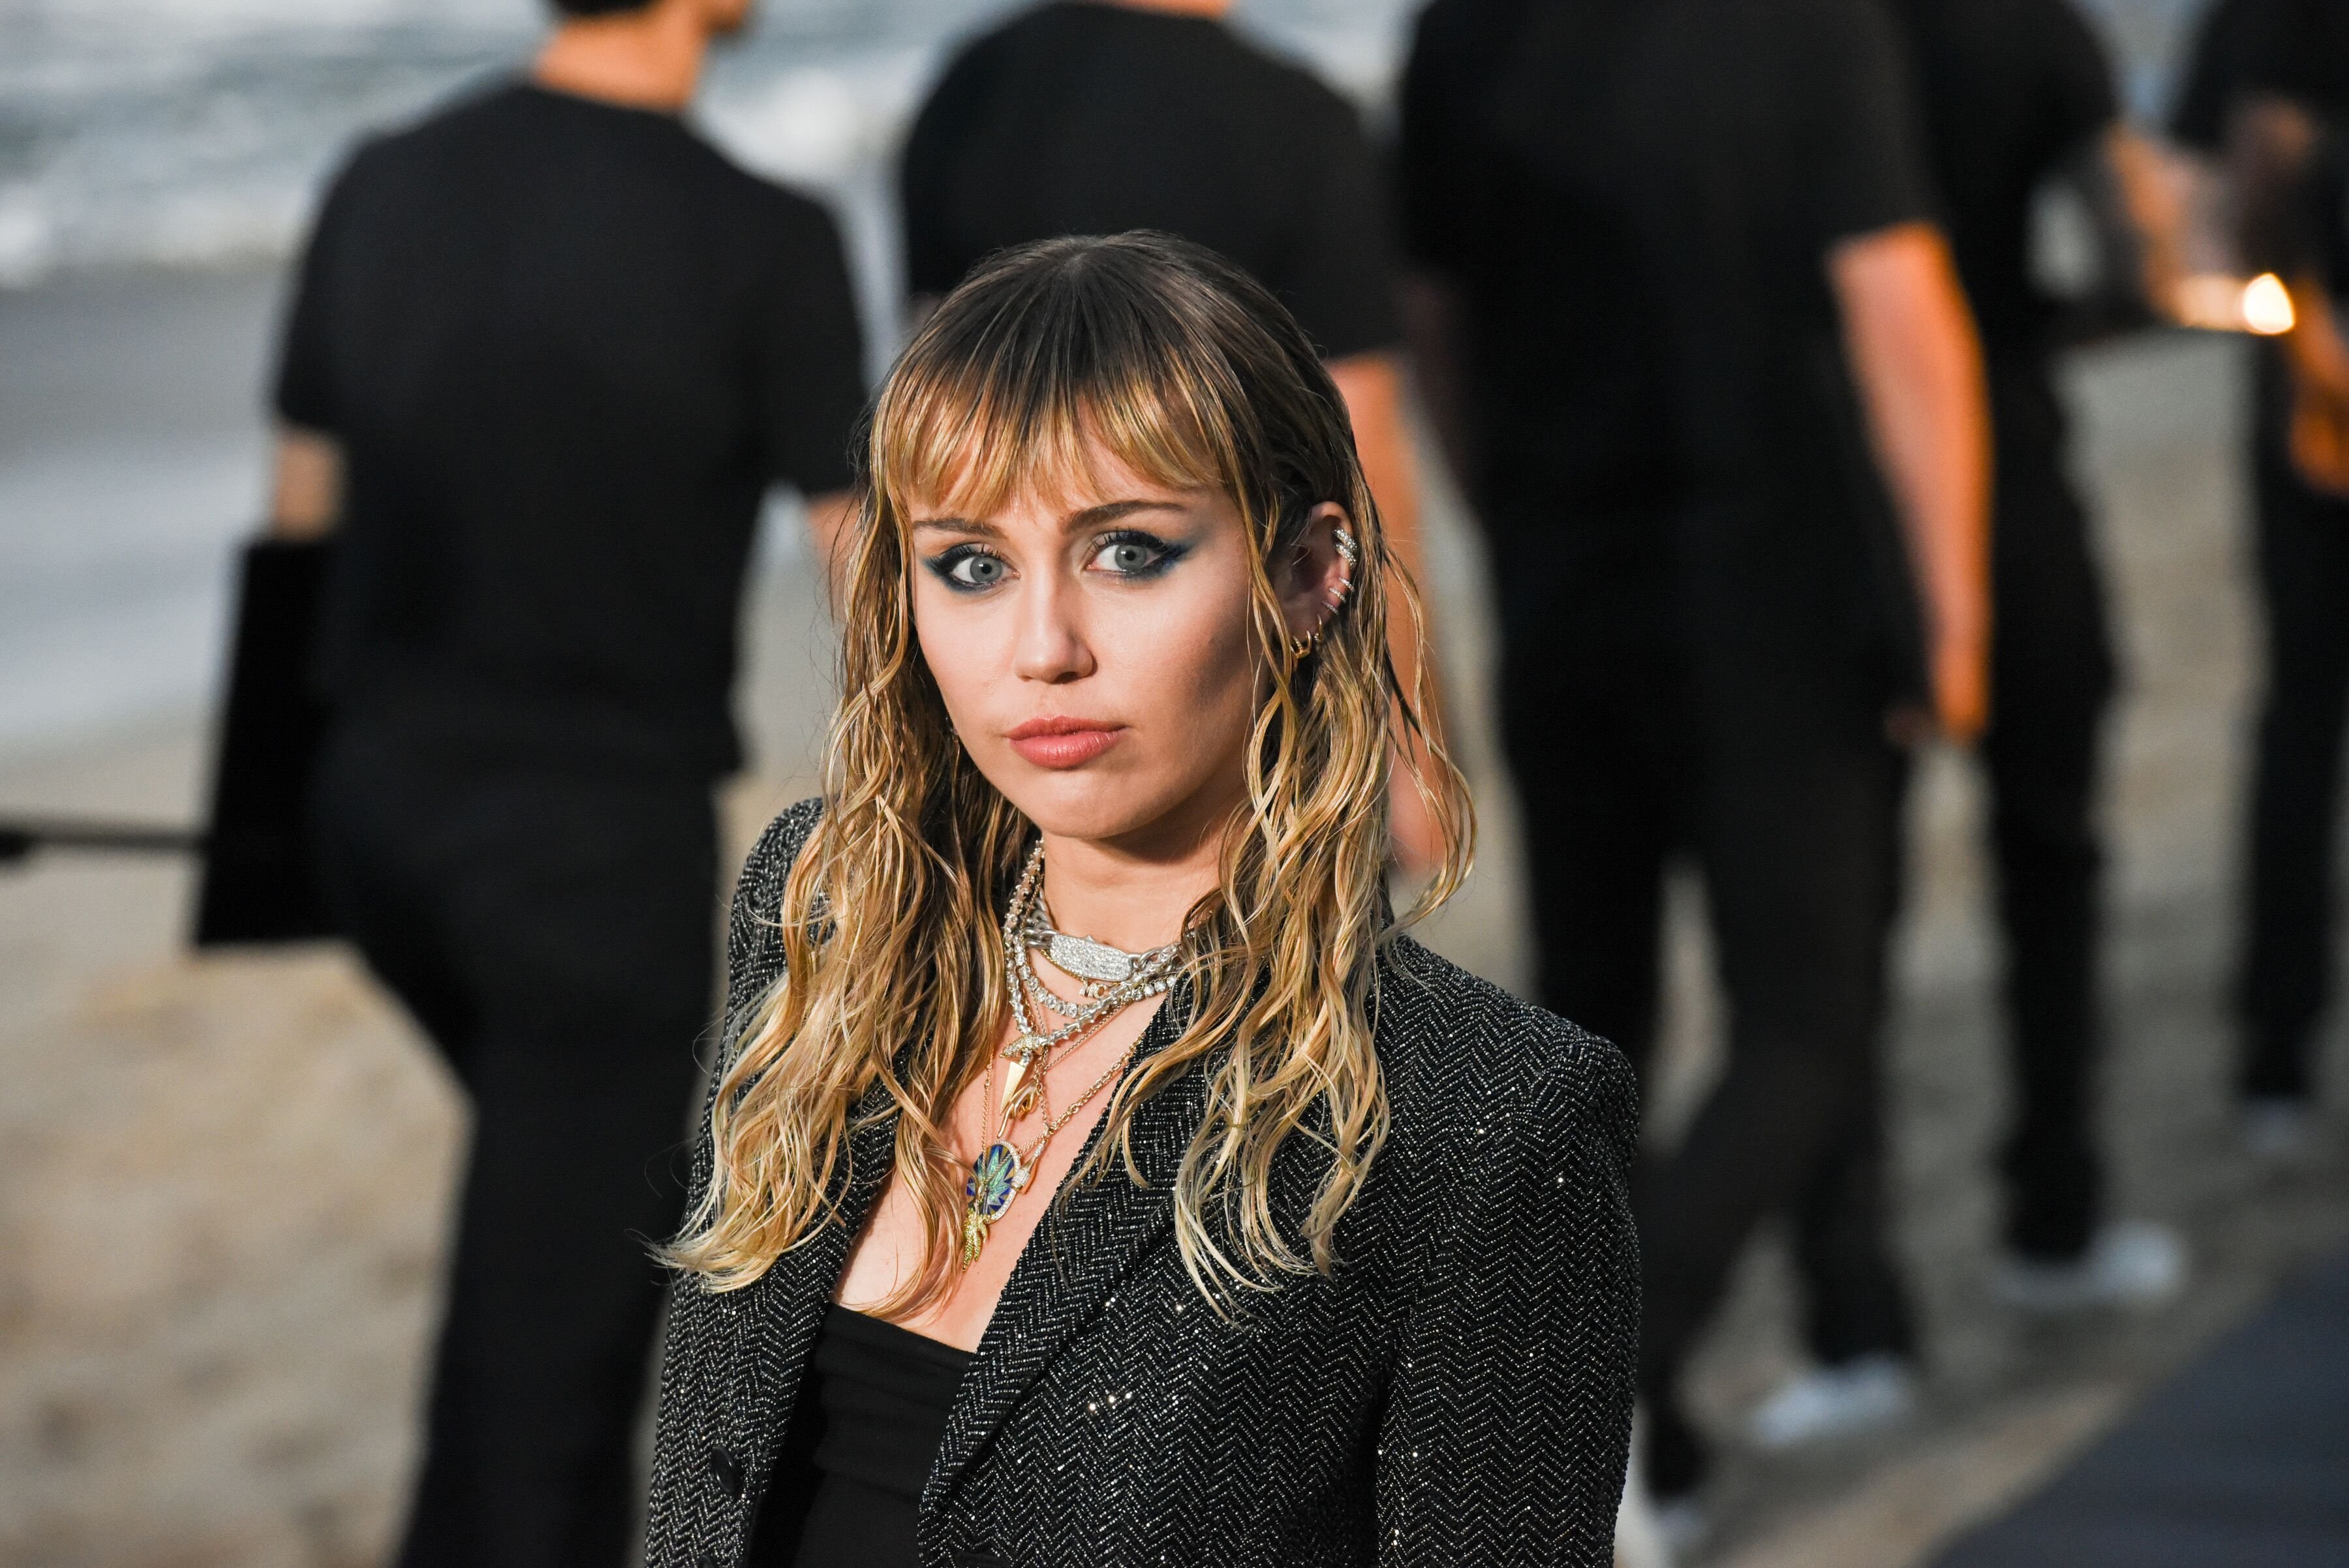 Miley Cyrus at Saint Laurent men's spring-summer 20 show on June 06, 2019, in Malibu, California | Photo: Presley Ann/WireImage/Getty Images